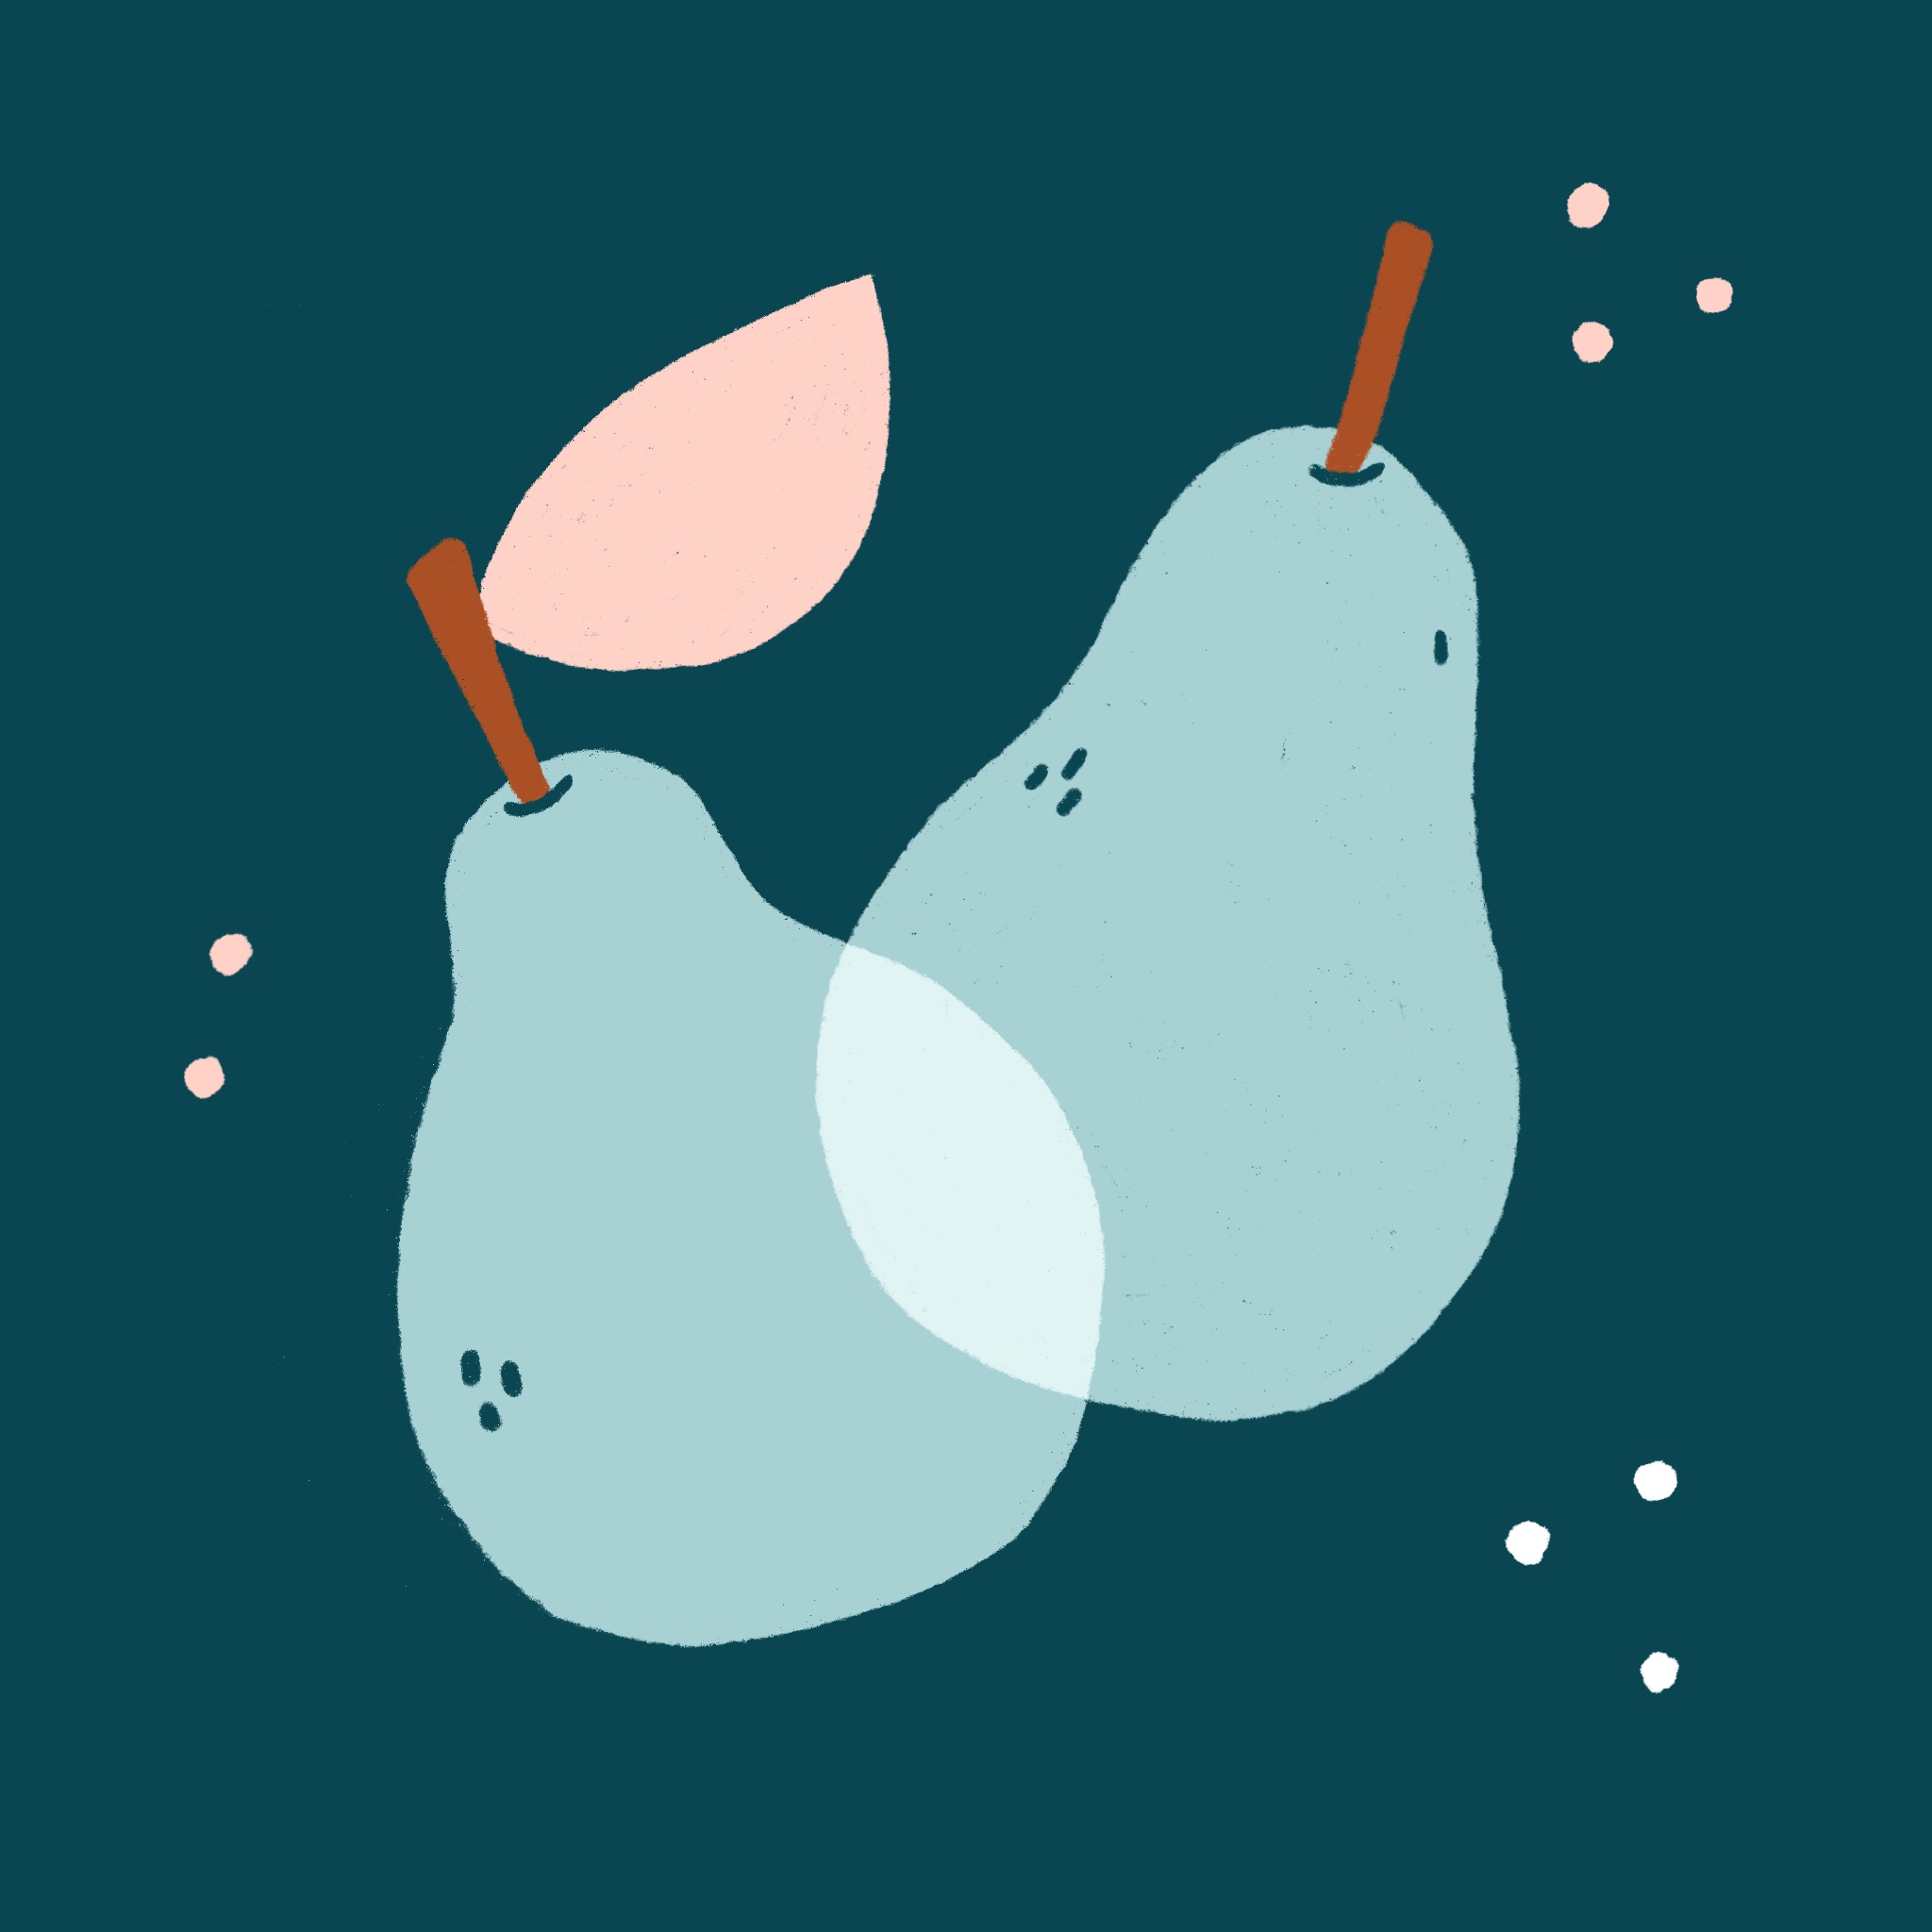 An illustration of two blue pears